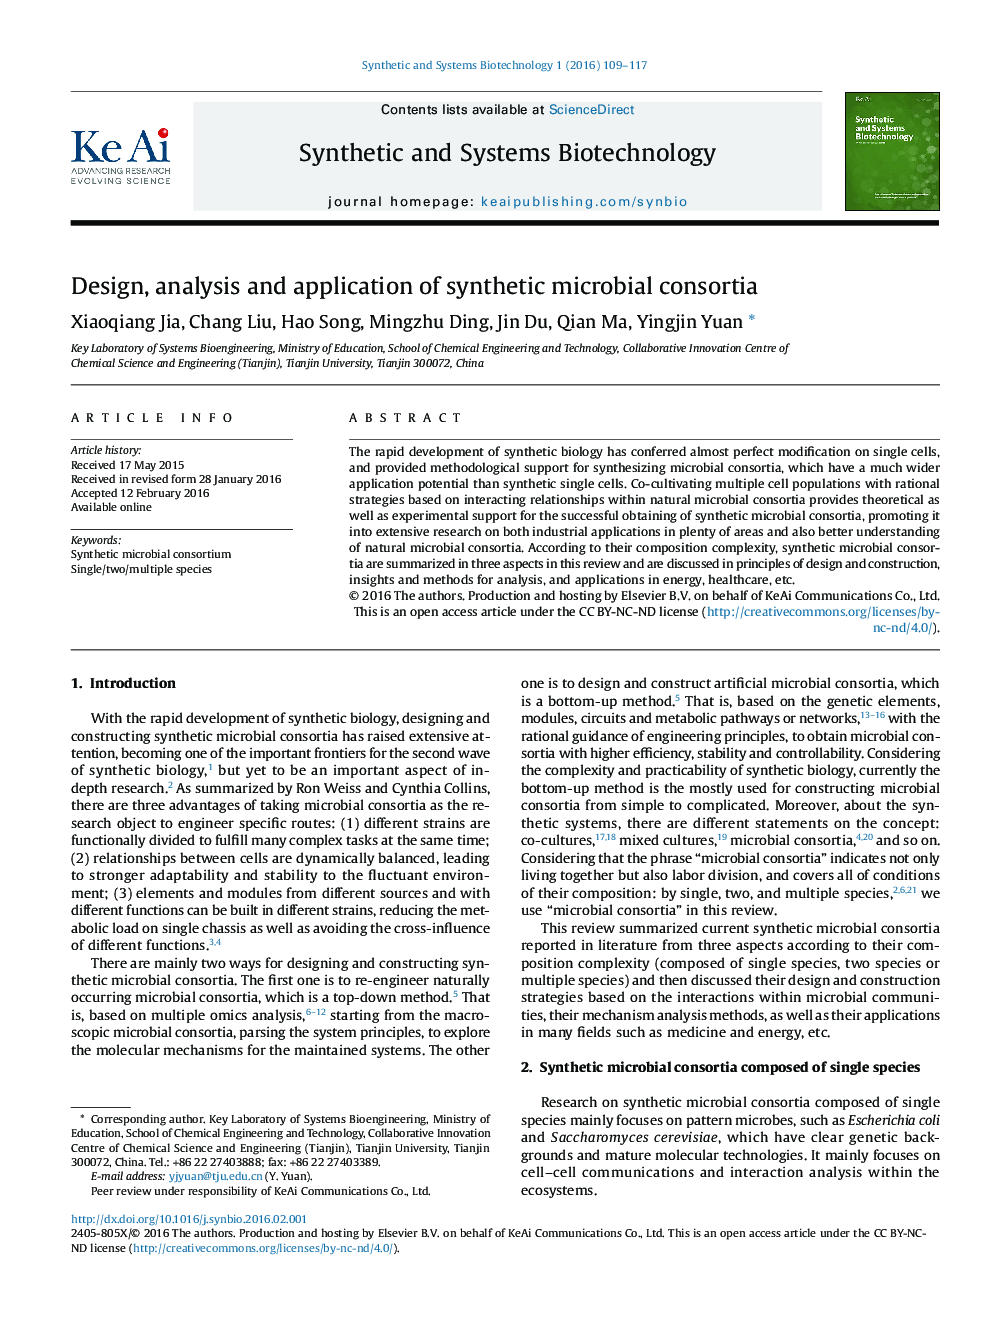 Design, analysis and application of synthetic microbial consortia 